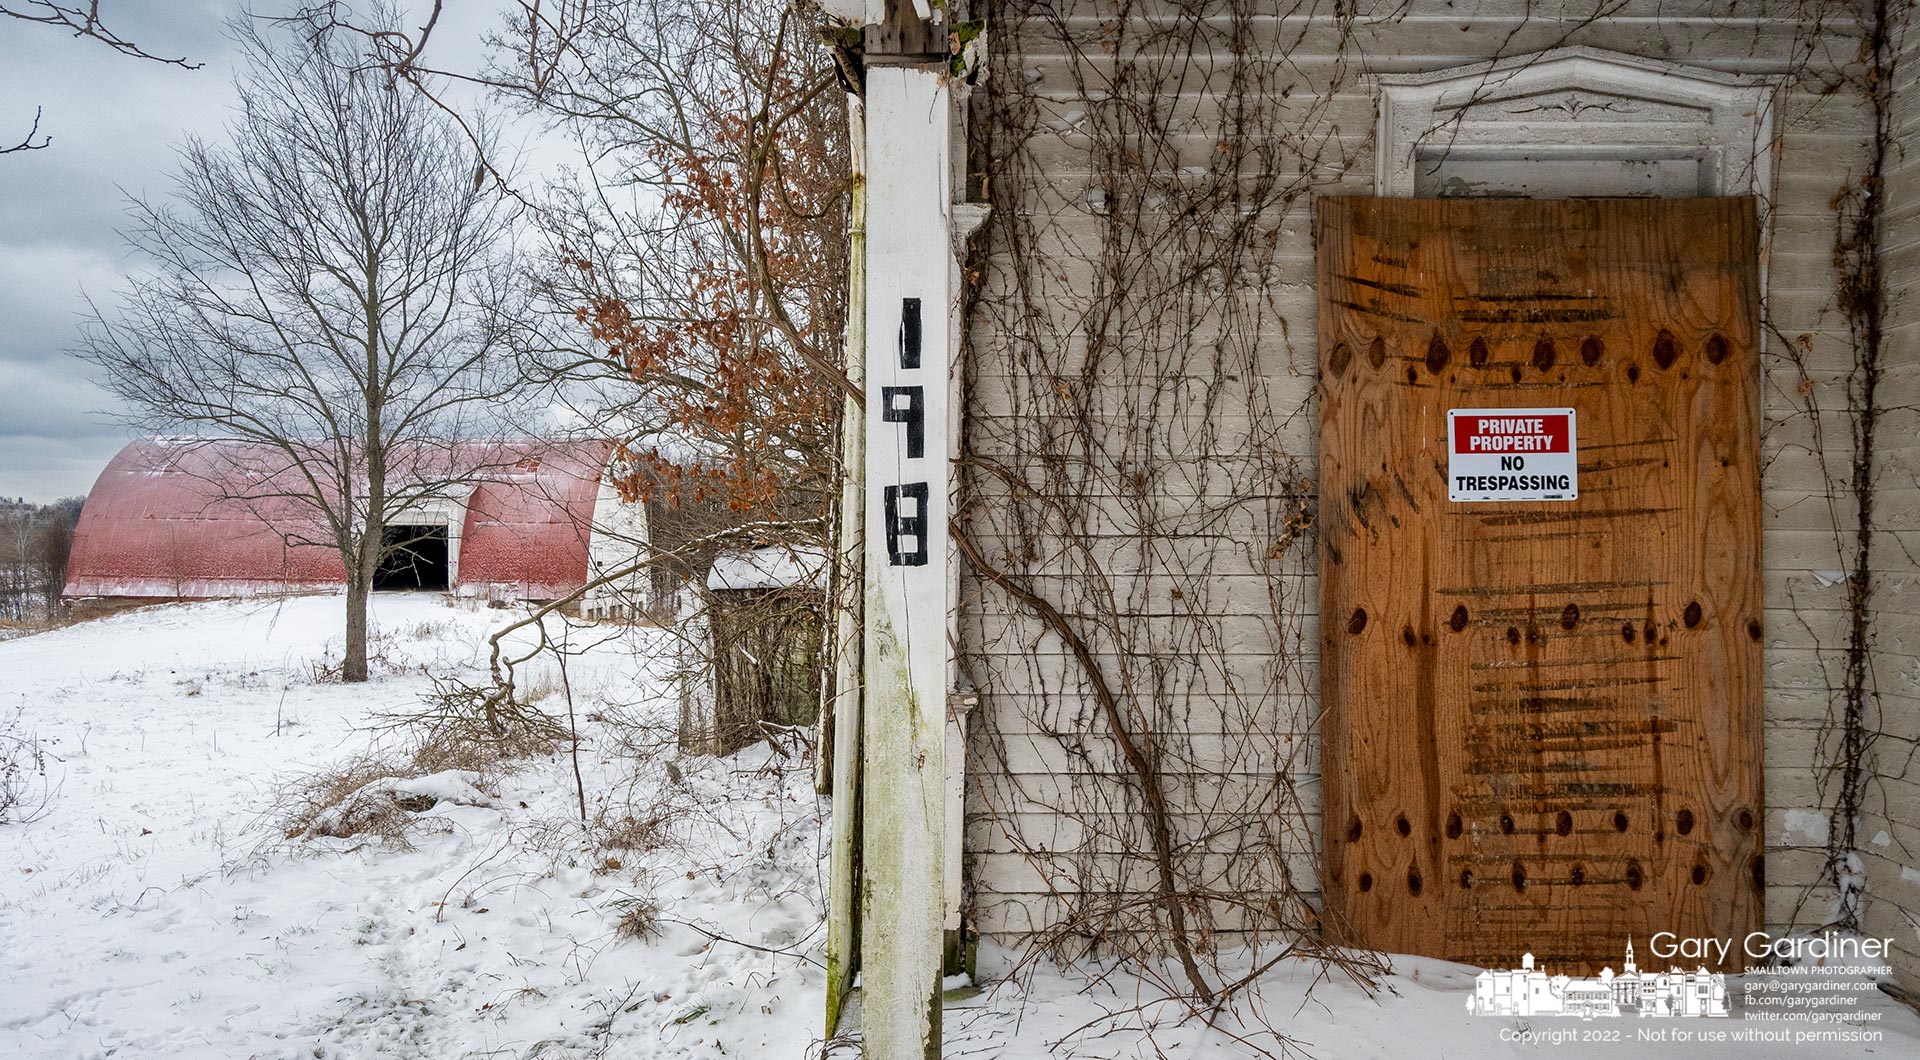 One of several new "No Trespassing" signs hangs on the plywood covering the door of the old farmhouse at the Braun Farm where developers hope to demolish the house and barn as part of plans to feel the property. My Final Photo for December 26, 2022.